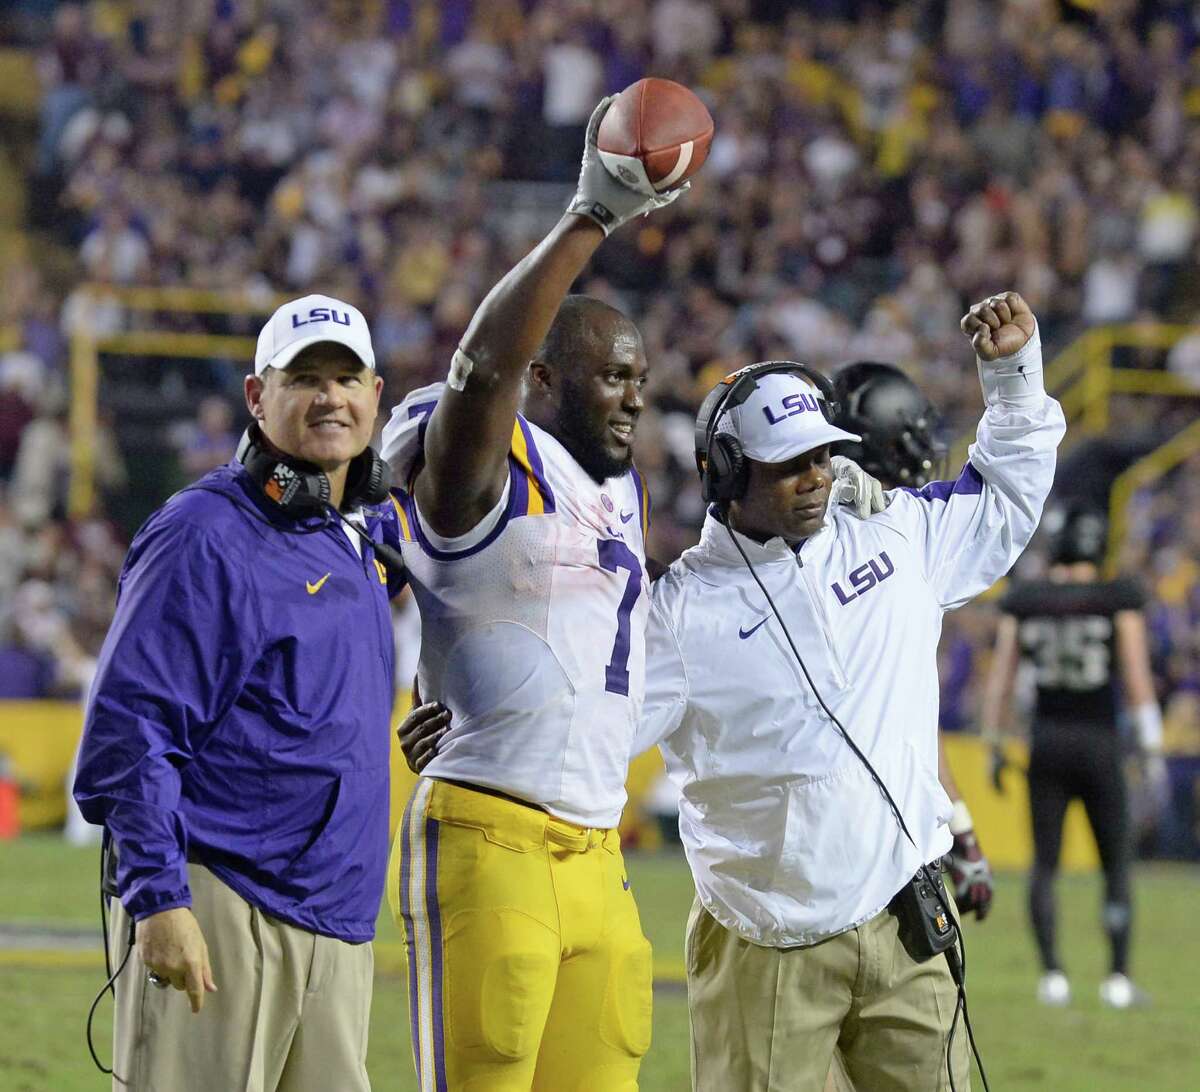 LSU running back Leonard Fournette holds the ball aloft after being recognized on the sideline for breaking the single-season rushing record, as he stands next to head coach Les Miles (left) and running backs coach Frank Wilson during in the second half against Texas A&M in Baton Rouge, La., on Nov. 28, 2015.